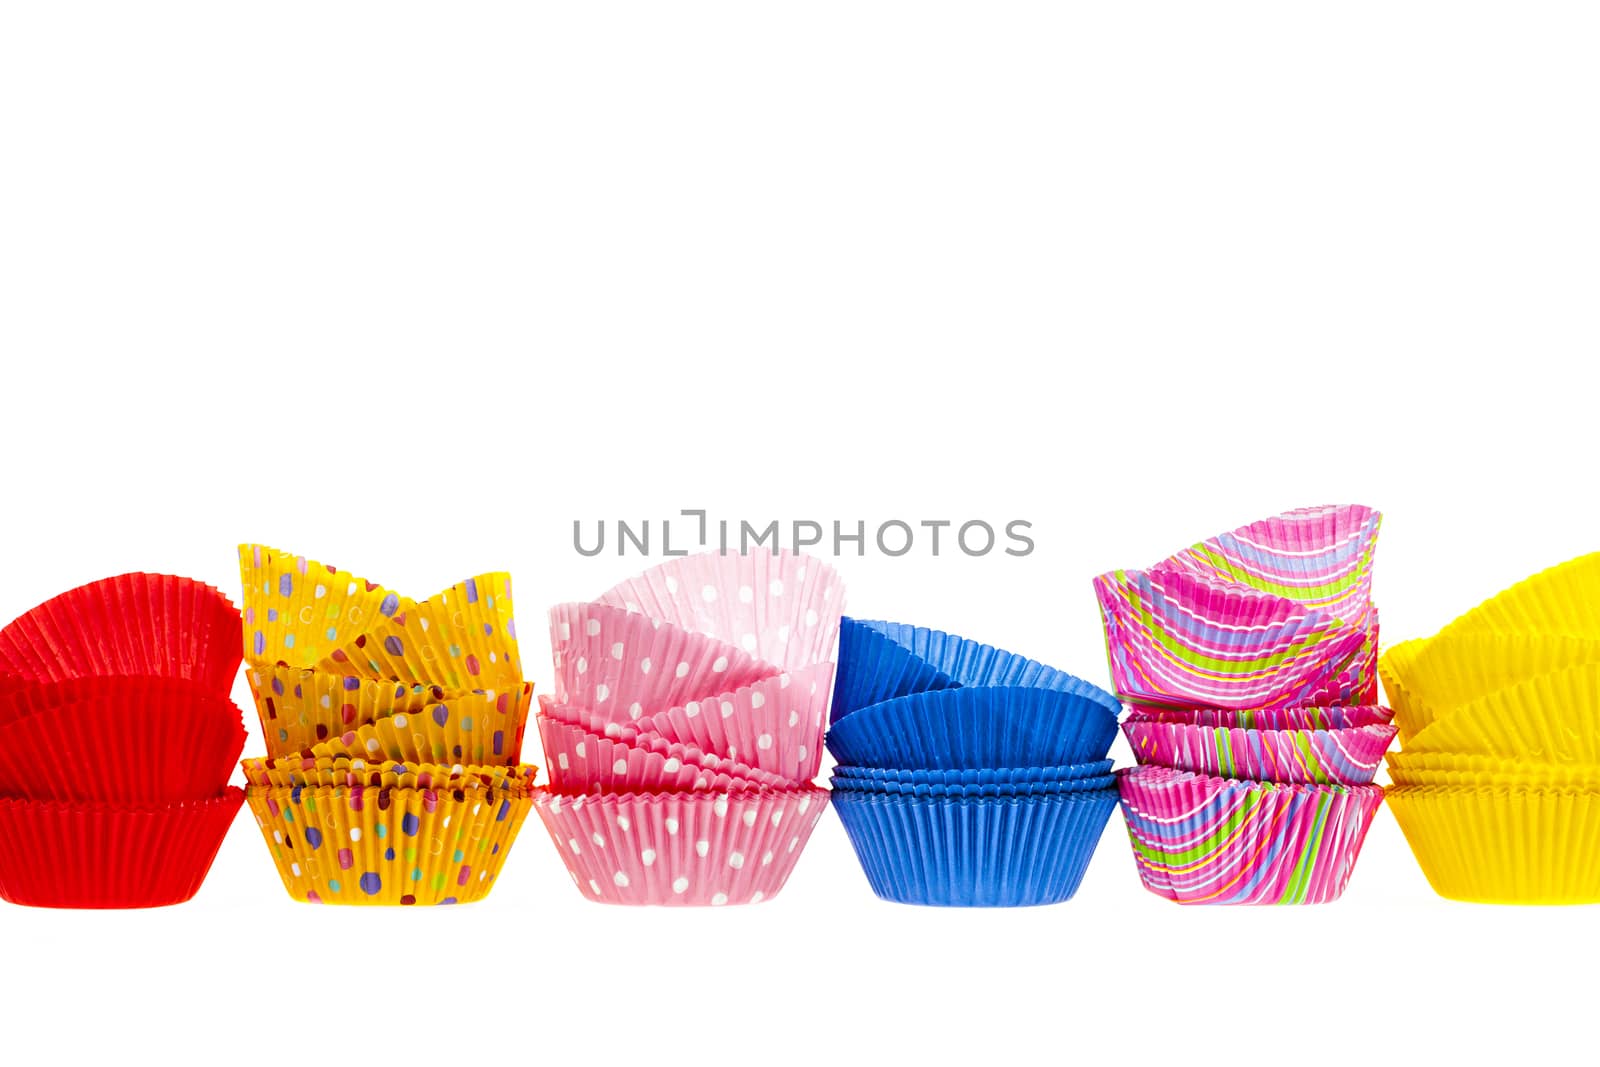 Several stacks of colorful muffin or cupcake cups isolated on white background as border